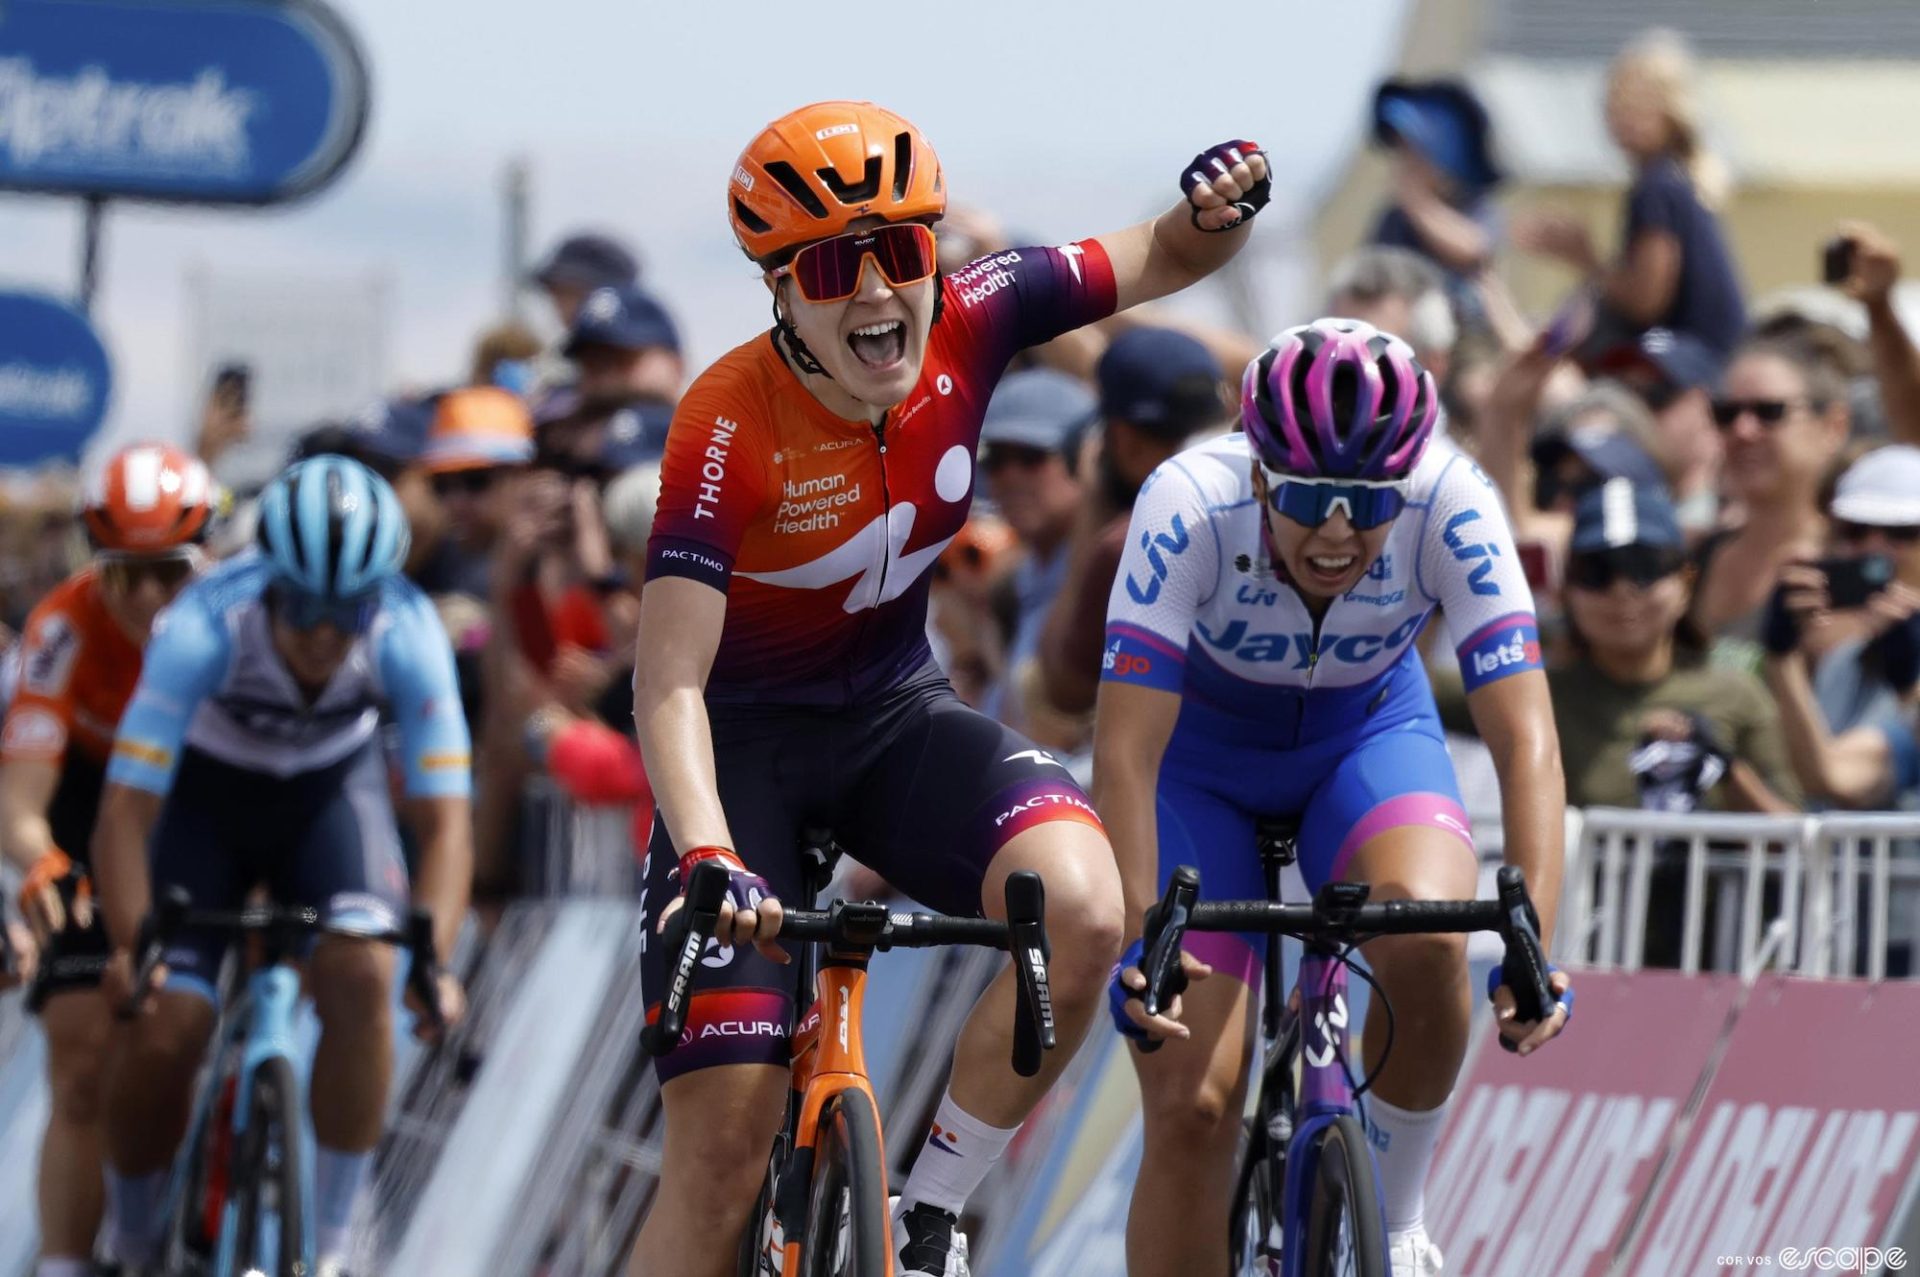 Daria Pikulik wins the first stage of the 2023 Santos Tour Down Under